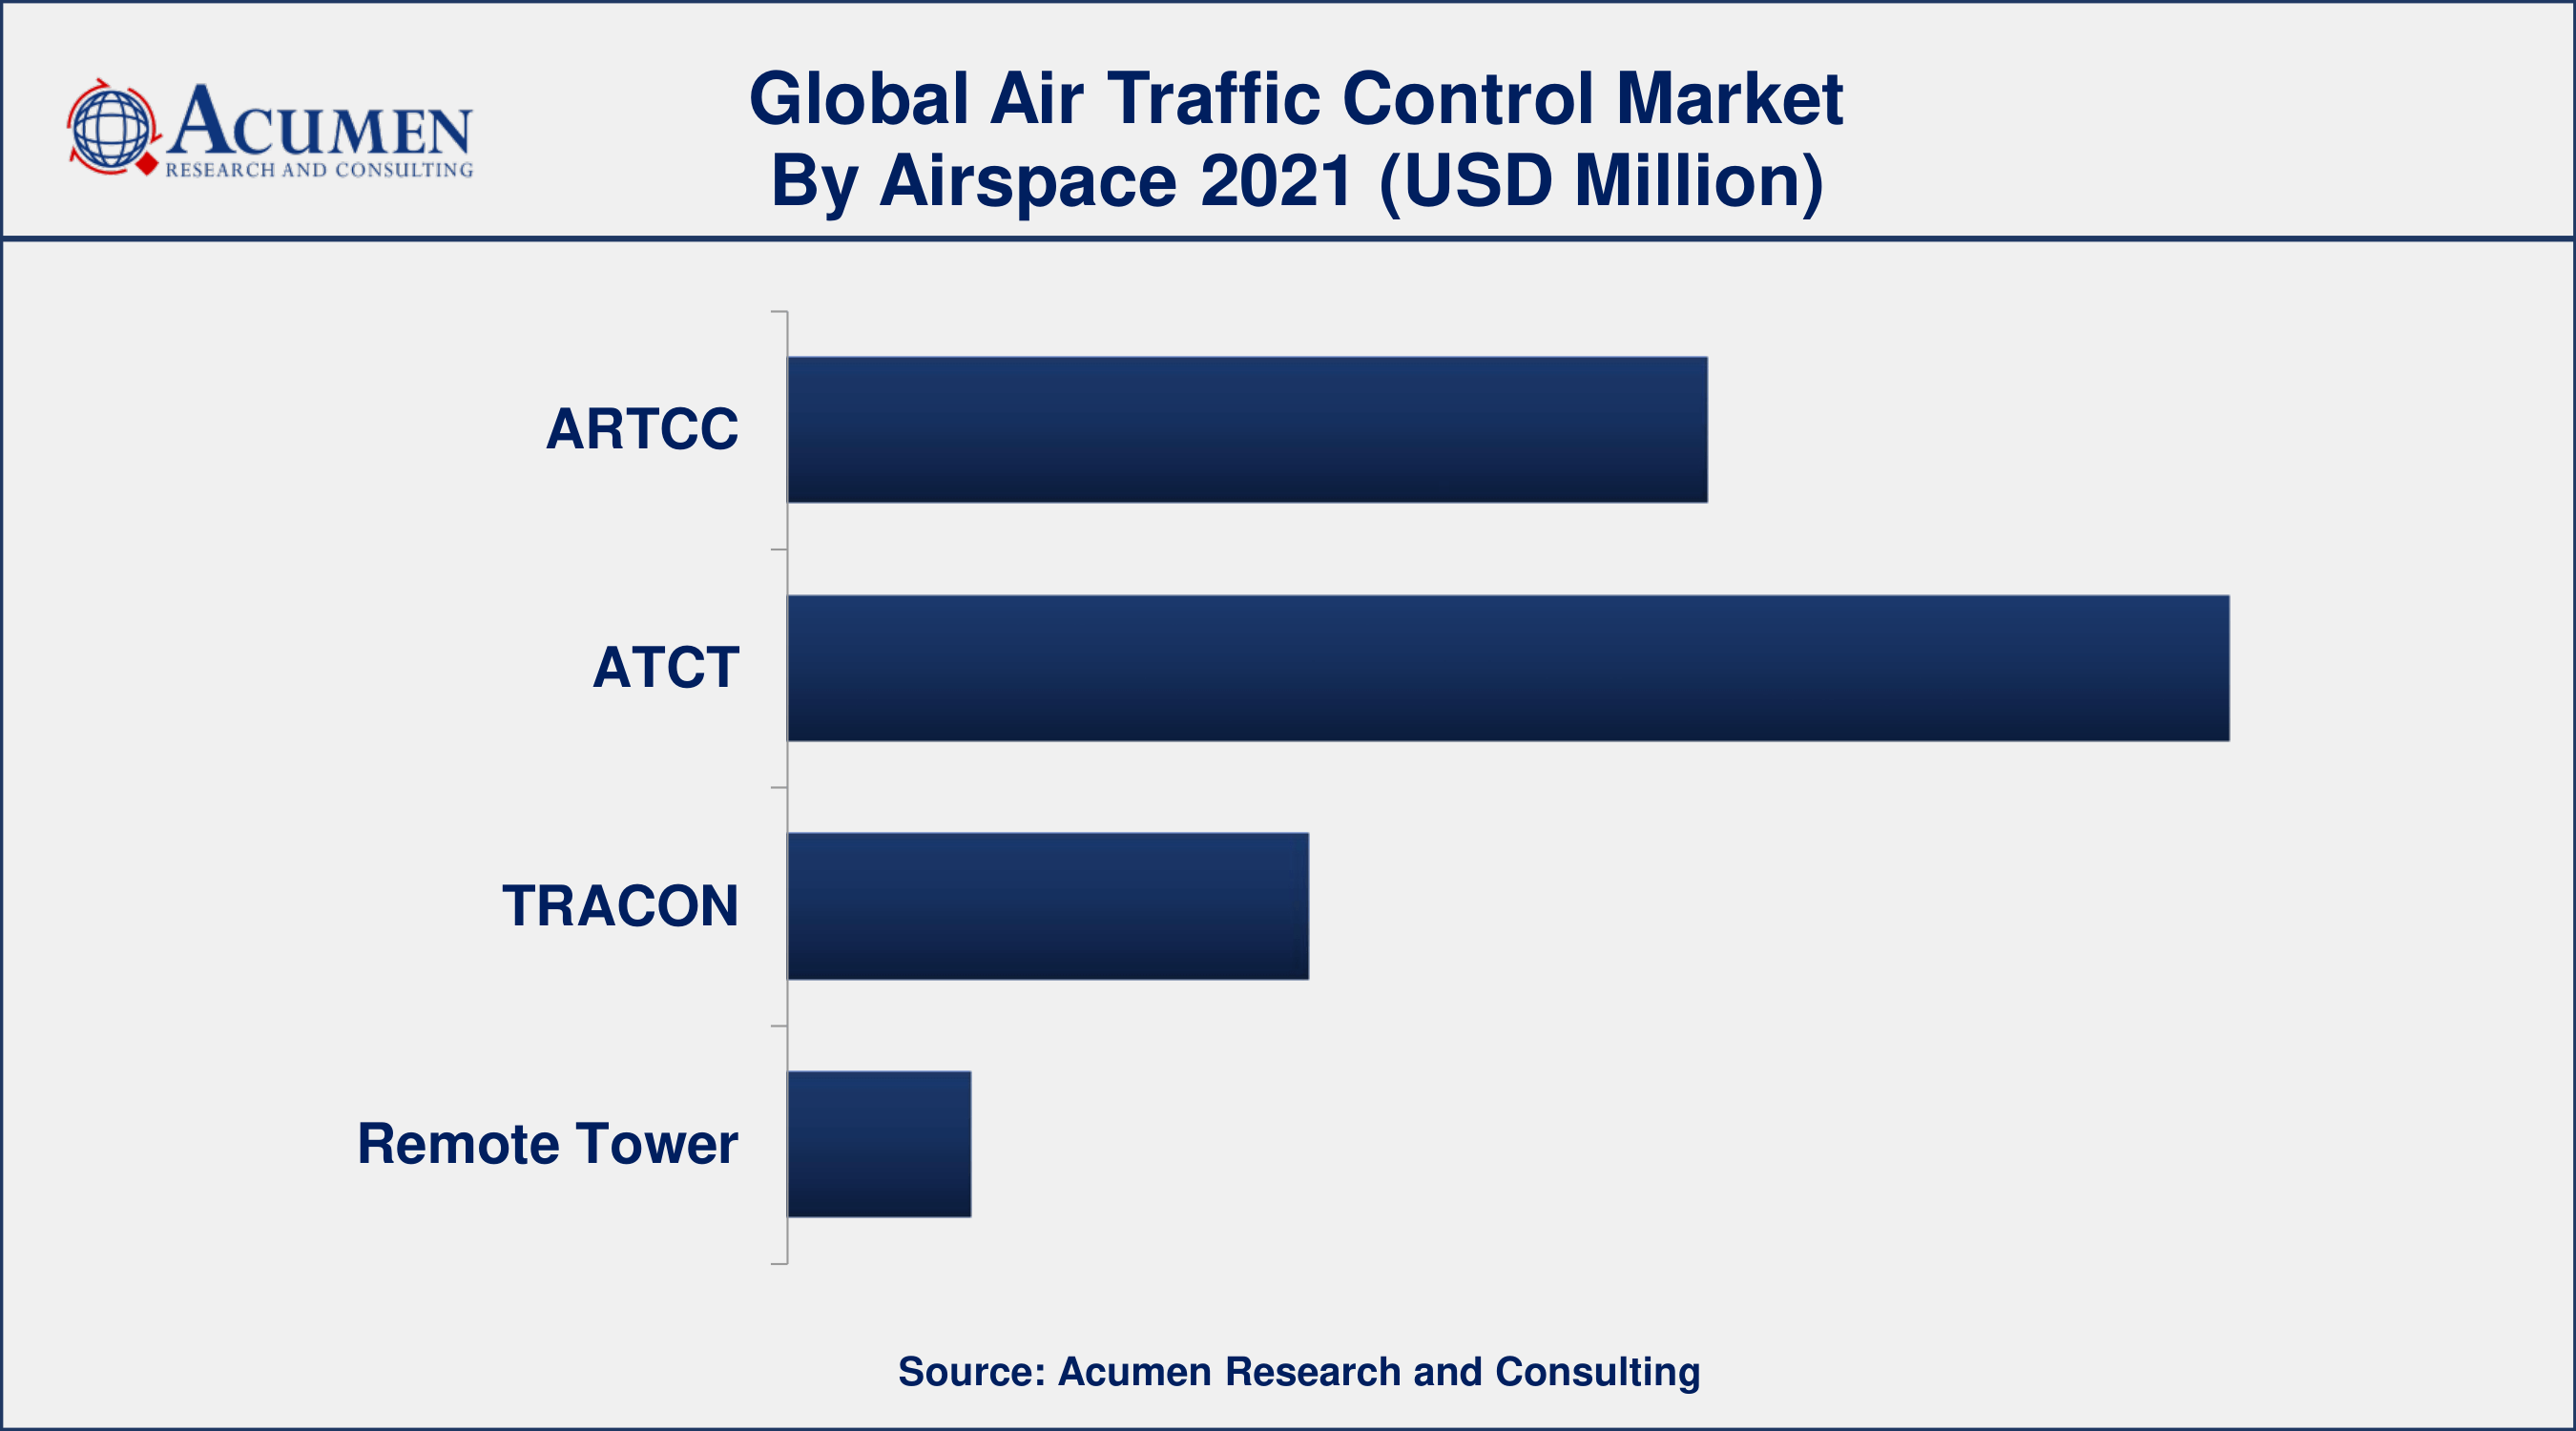 By airspace, ATCT segment generated about 45% market share in 2021